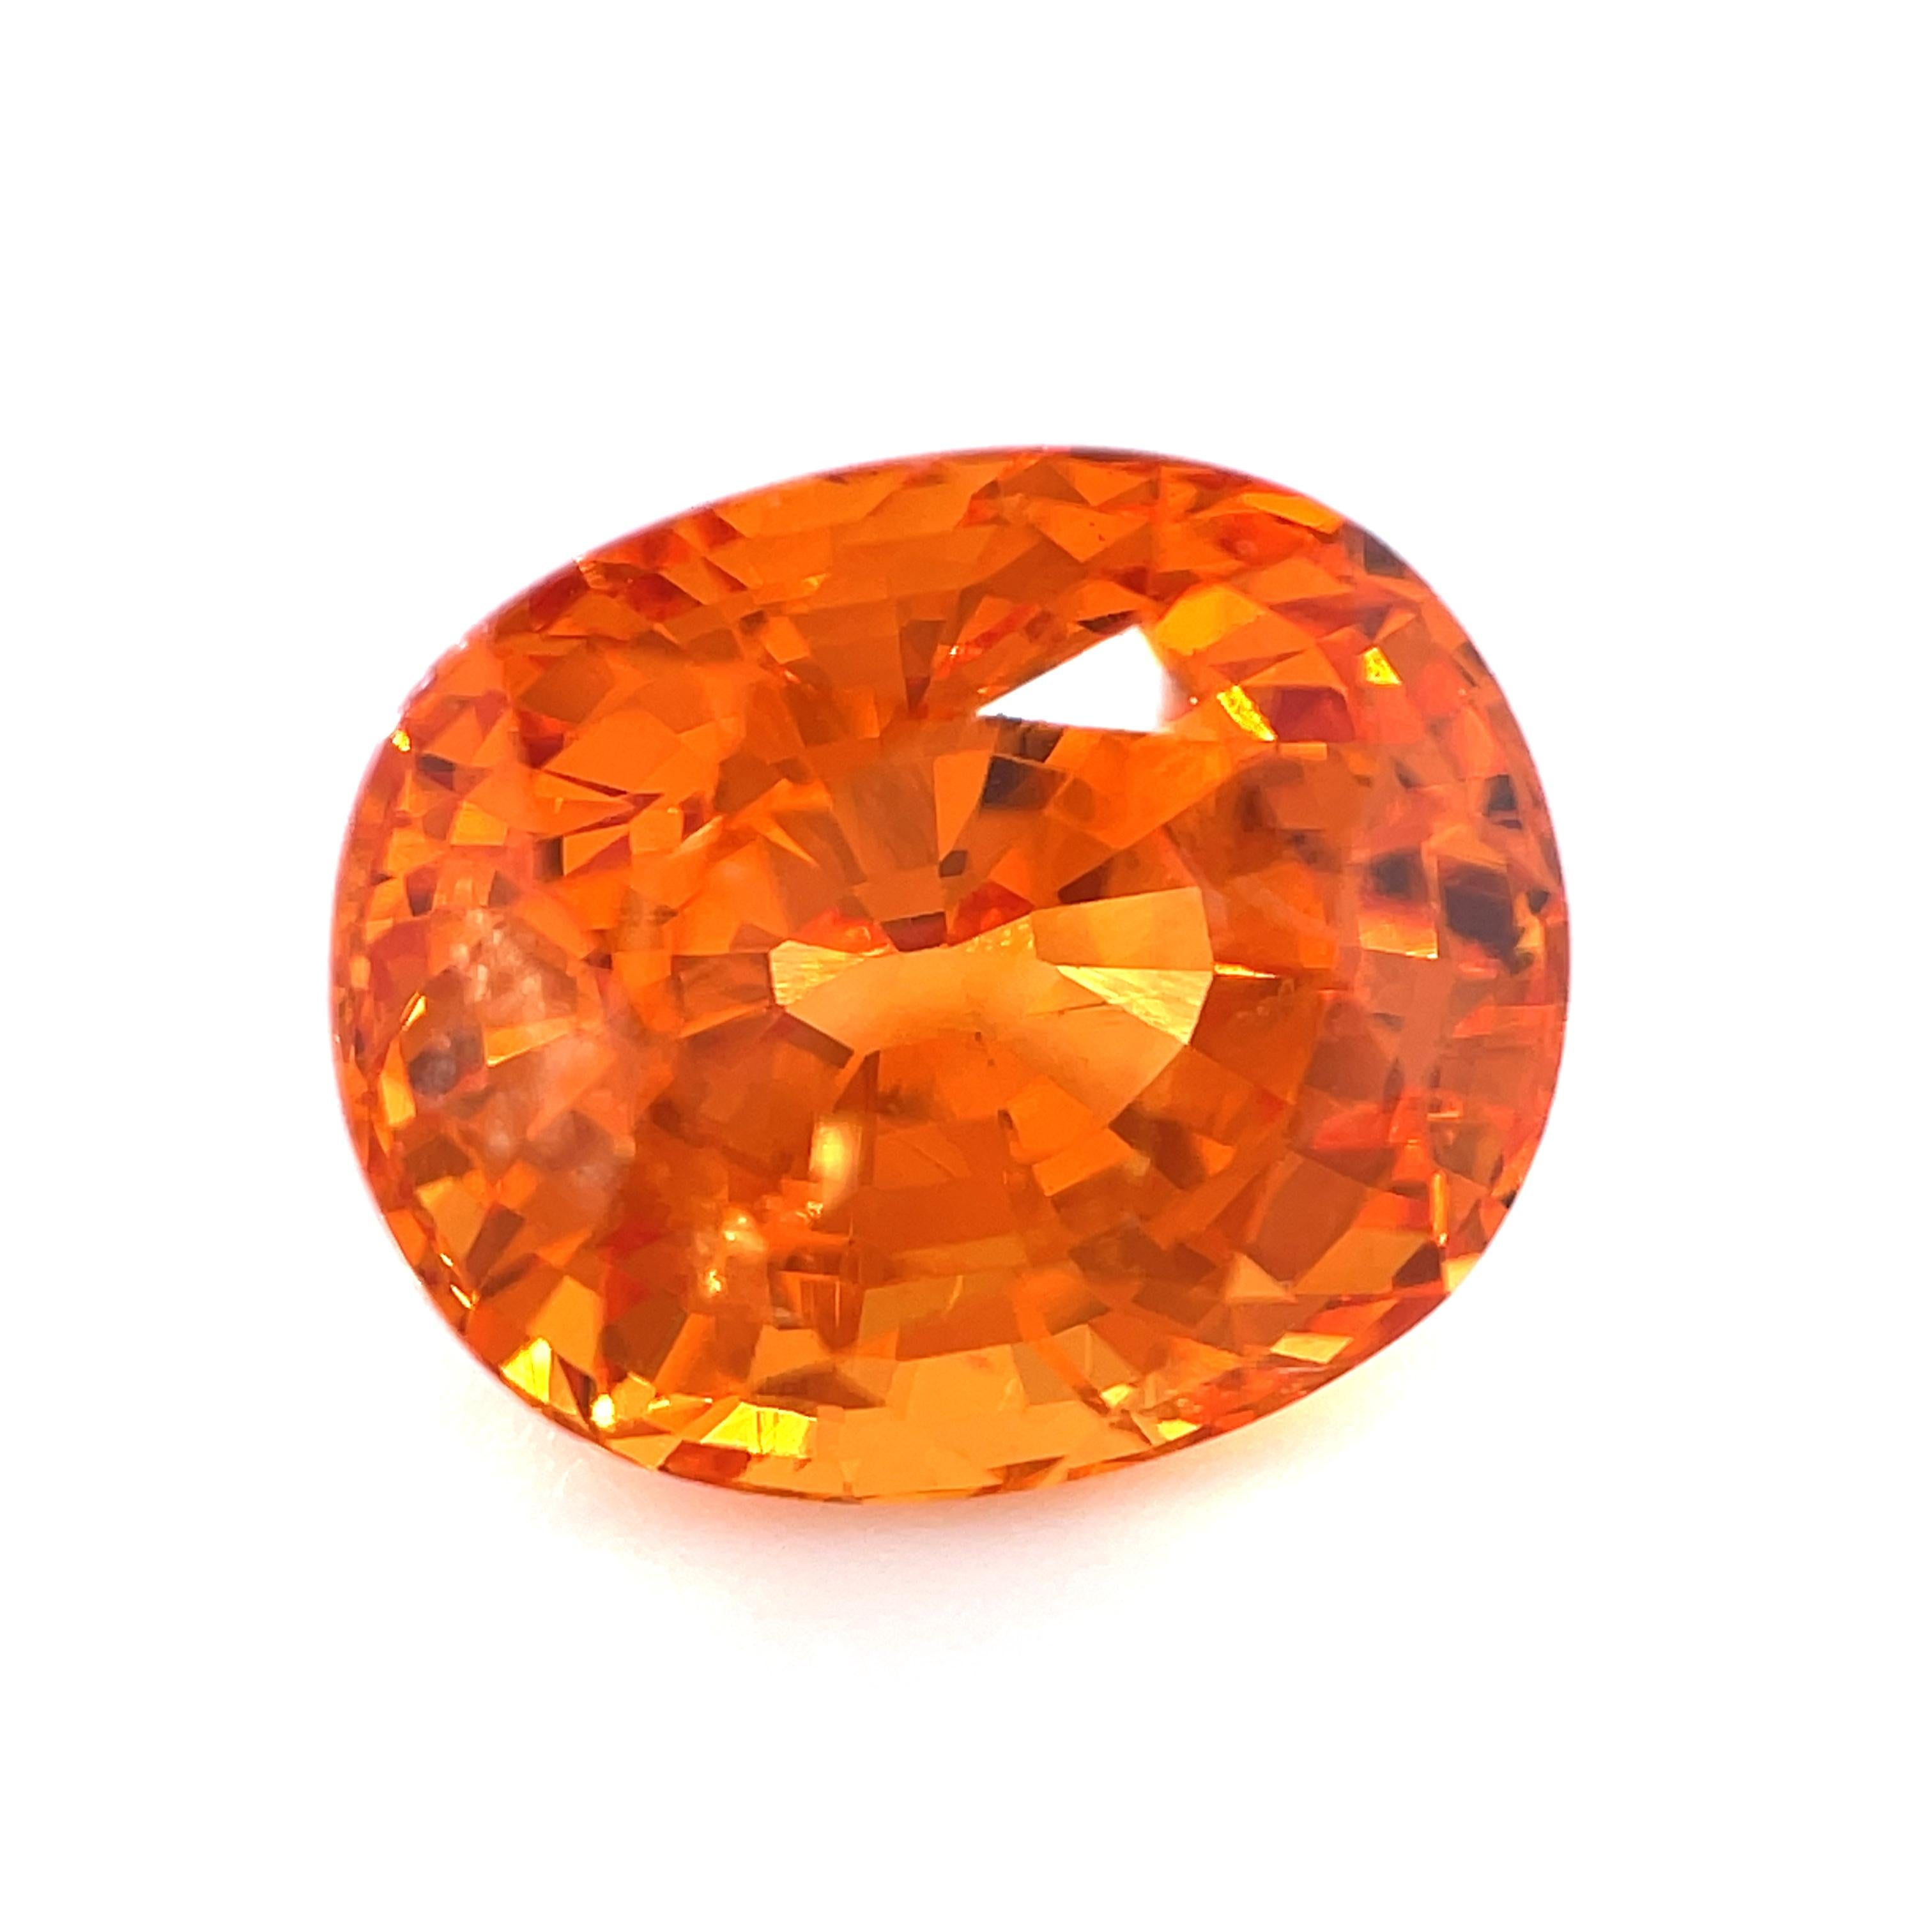 This stunning spessartite Mandarin garnet has all the hallmarks of a collector gemstone! Weighing 6.15 carats, it is unusually large and of superfine quality, with exquisite pure orange color and exceptional clarity. This extremely bright gem is